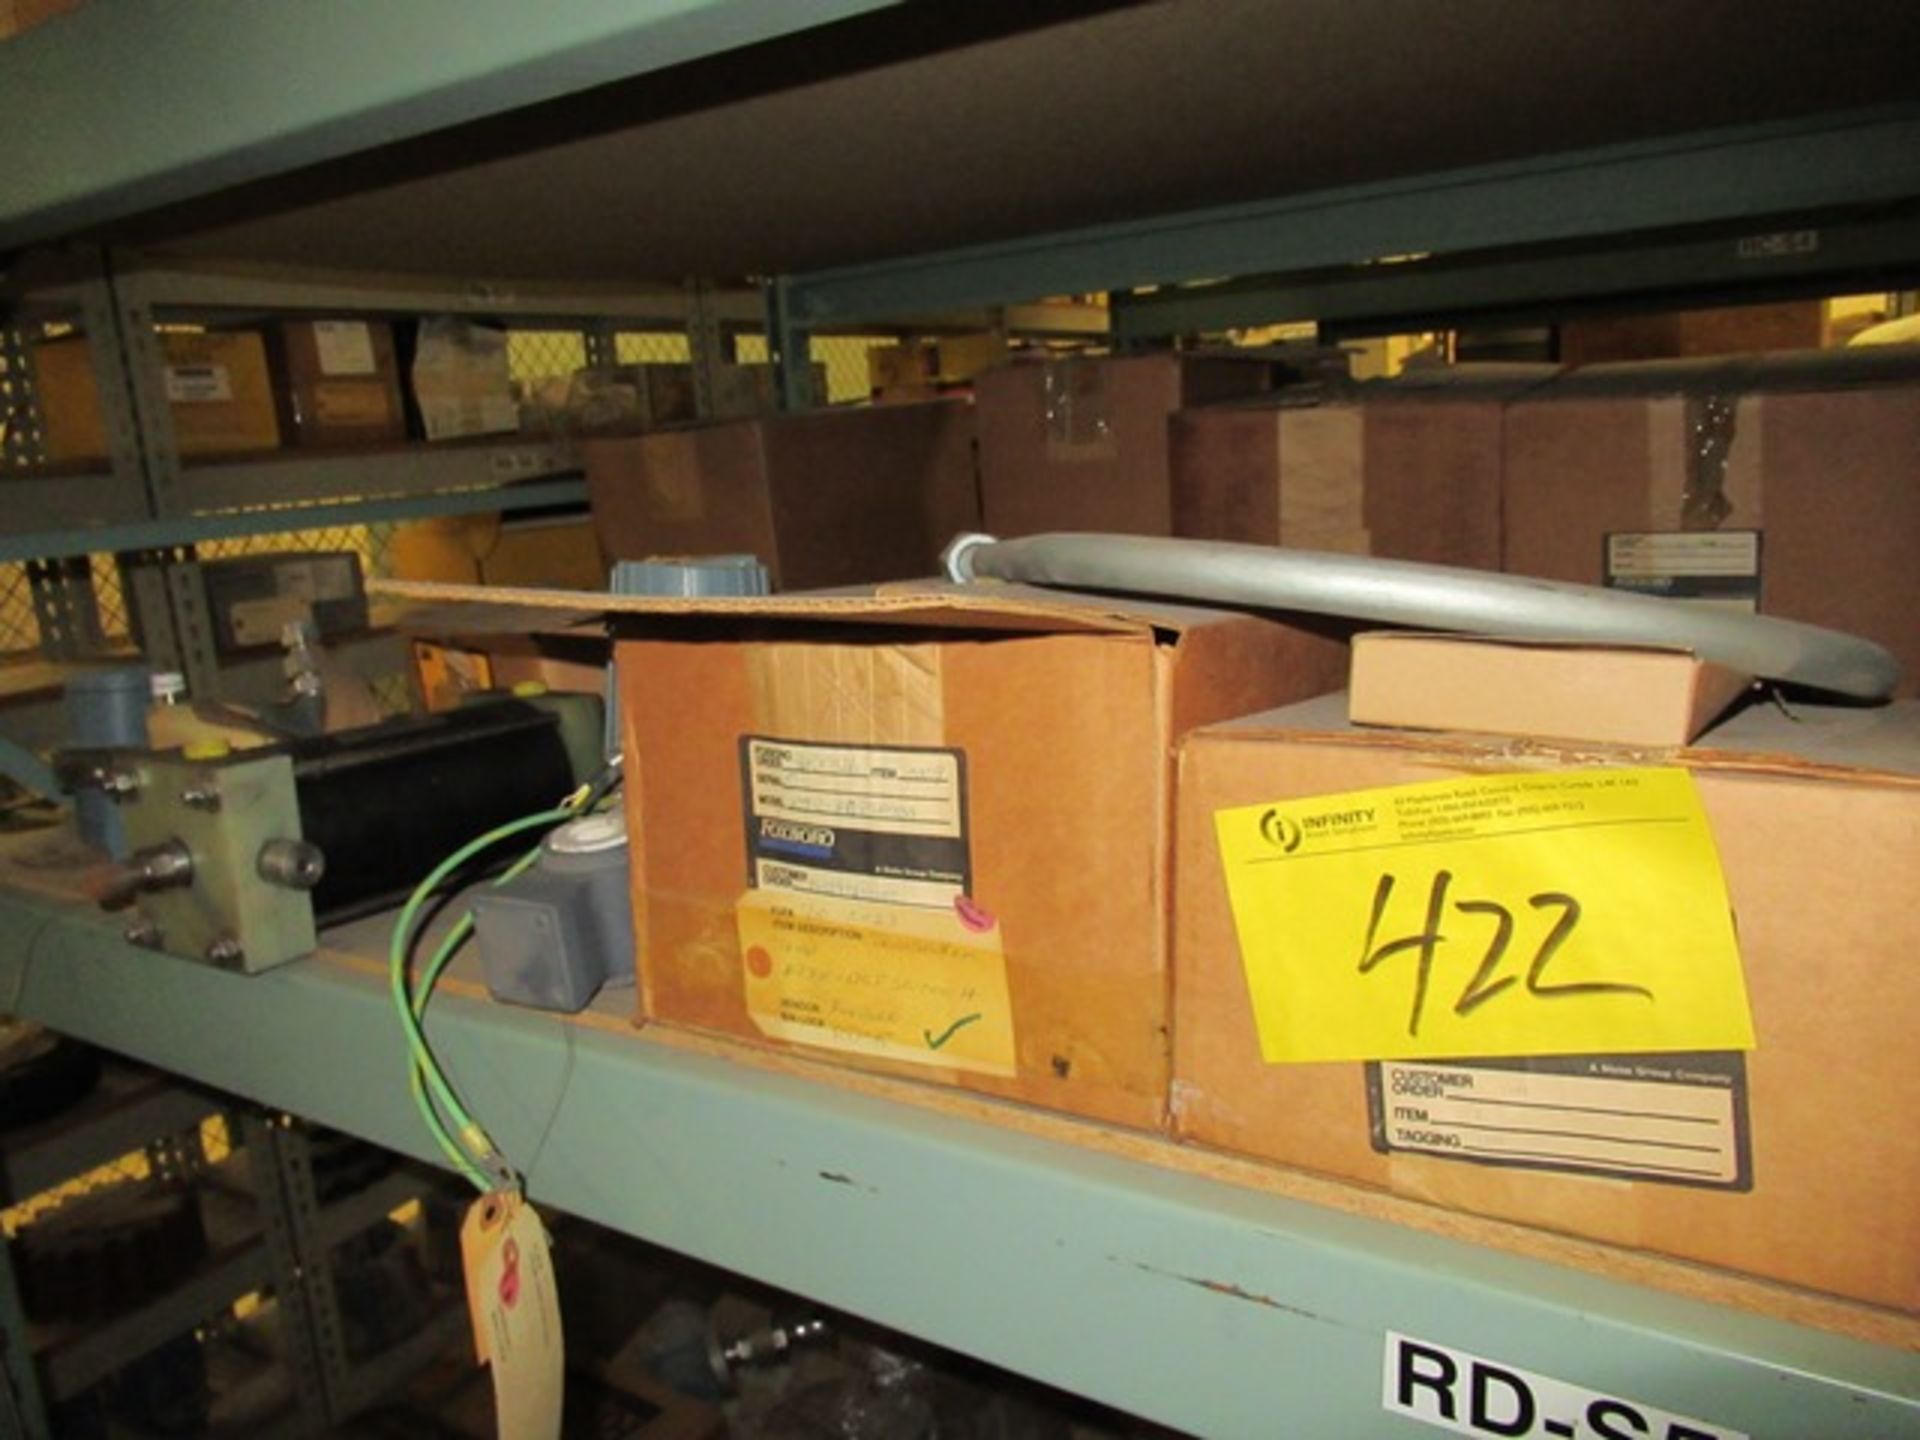 LOT ASST. FOXBORO VALVES, BLACK CLAWSON FILTERS, ETC. 1 SECTION RACKING (M-S) - Image 8 of 11